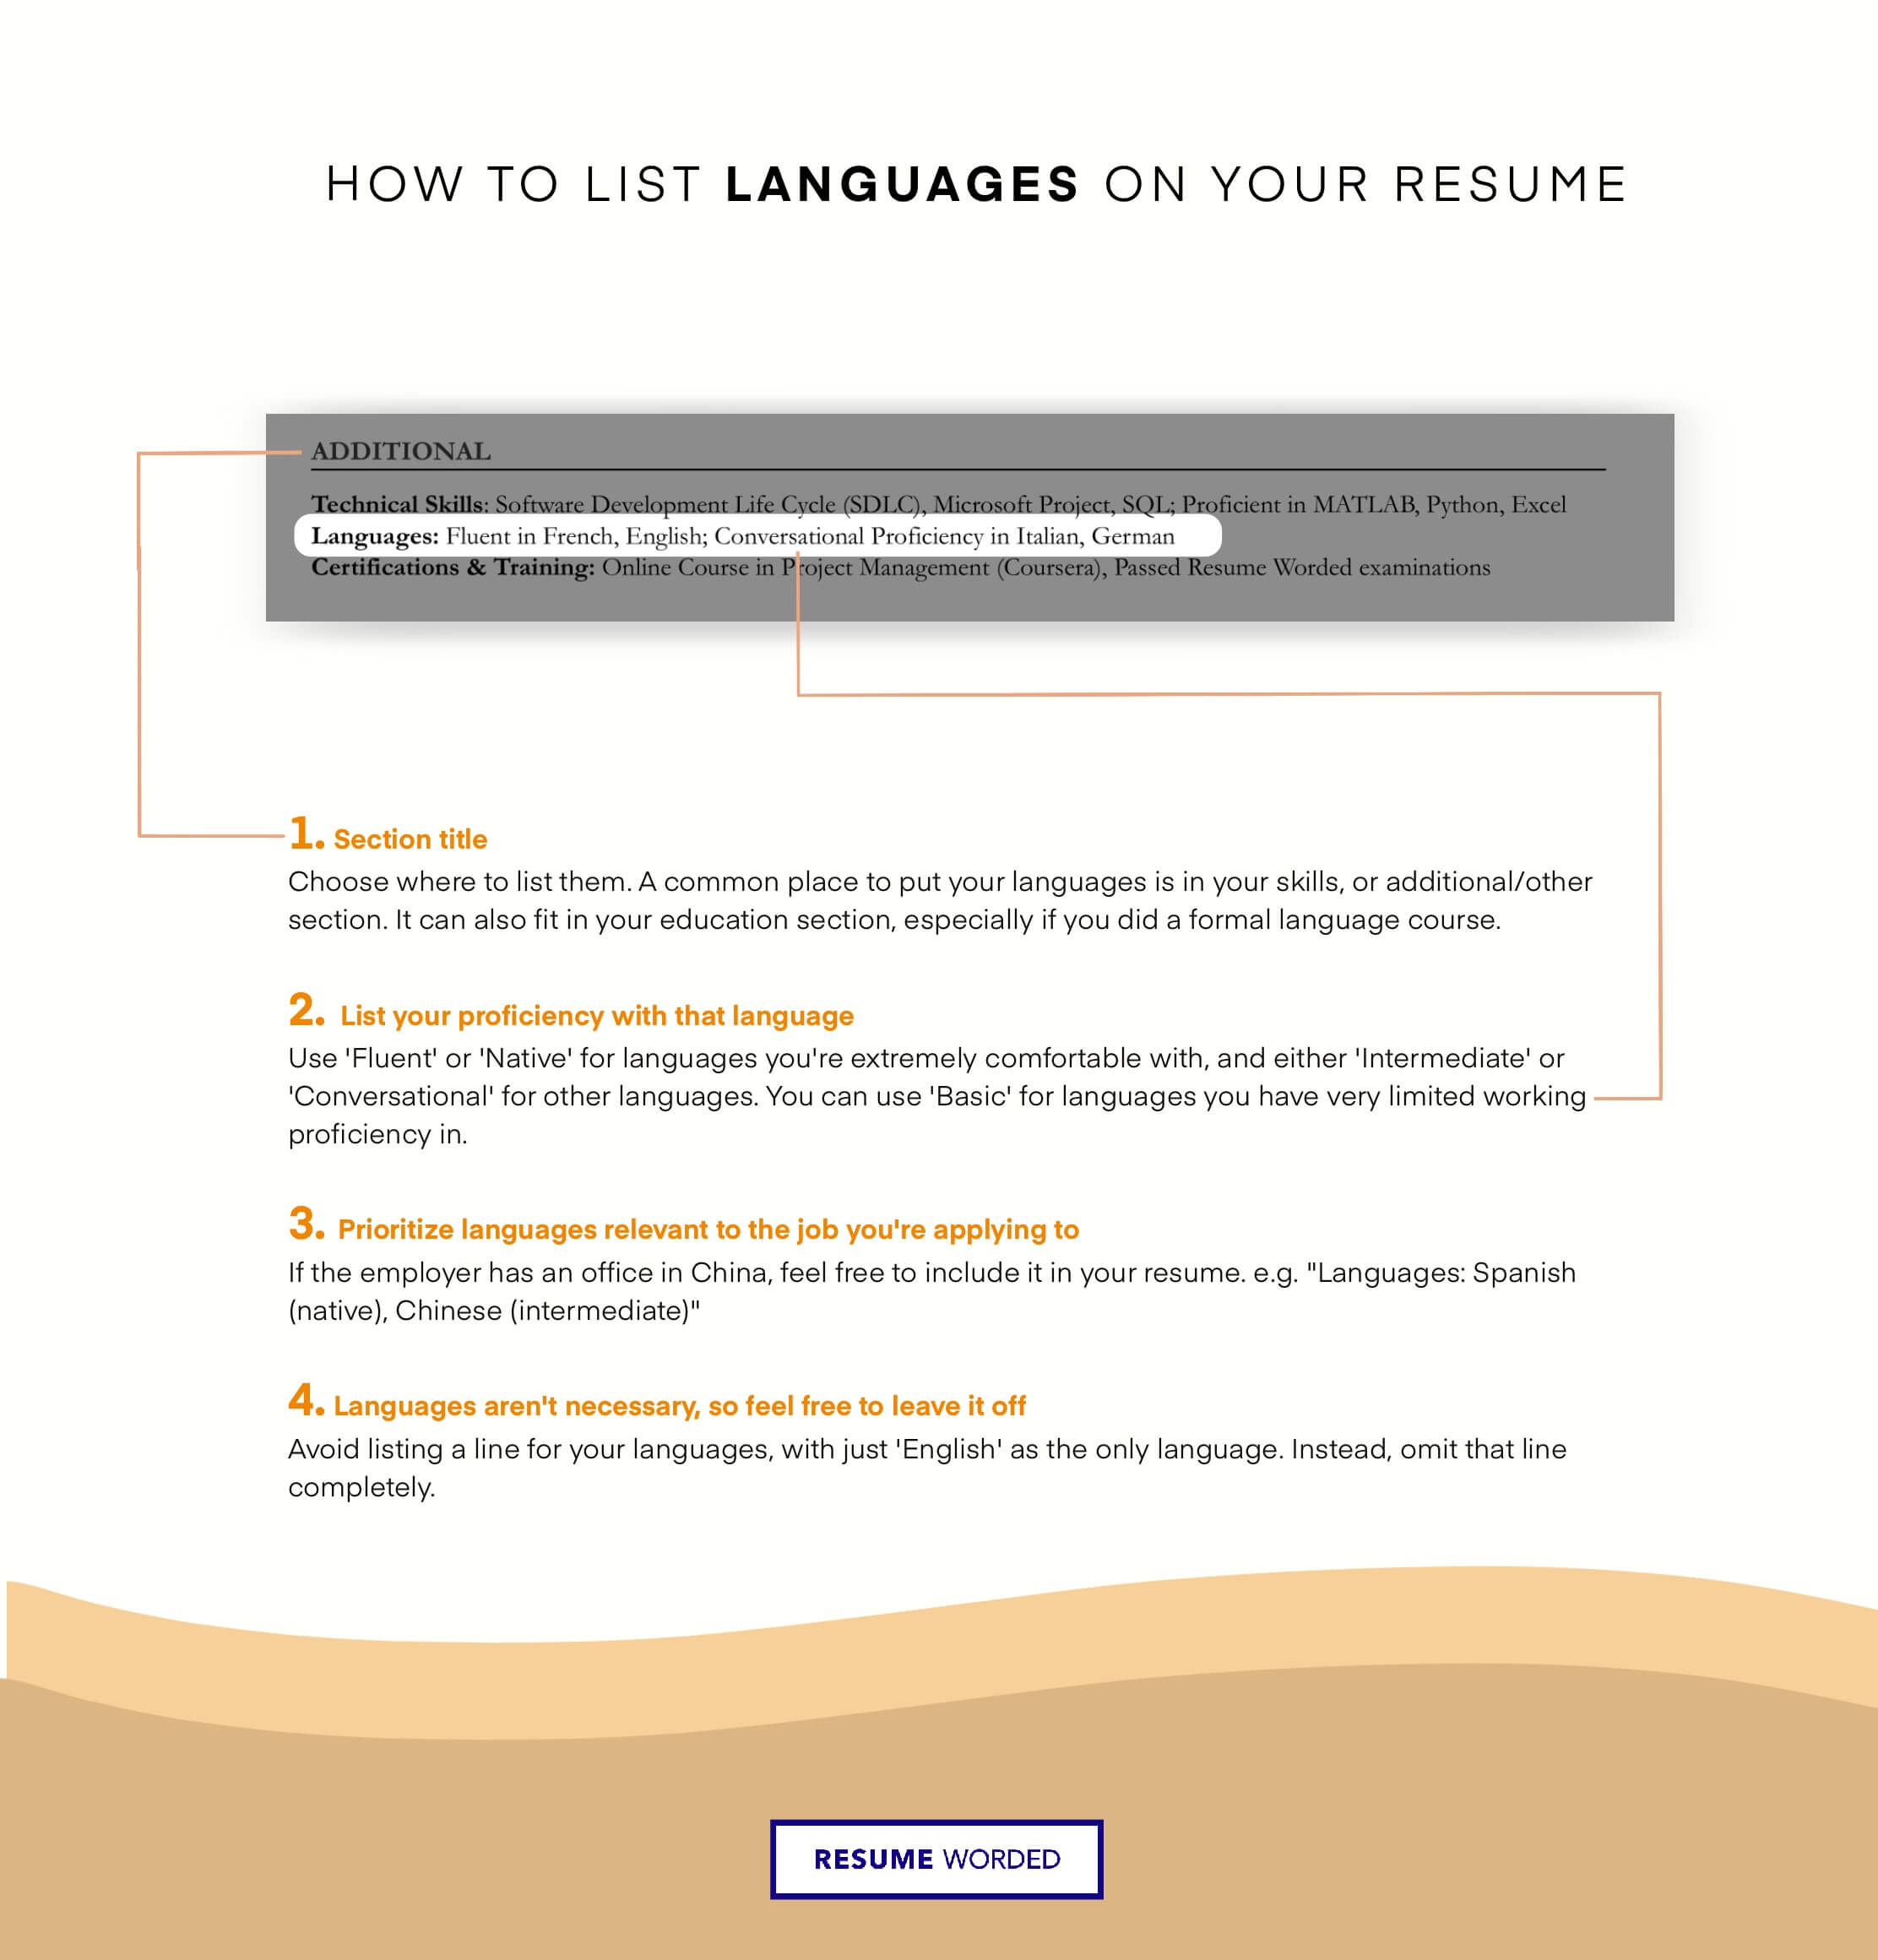 Consider learning a second language - General Nurse Resume